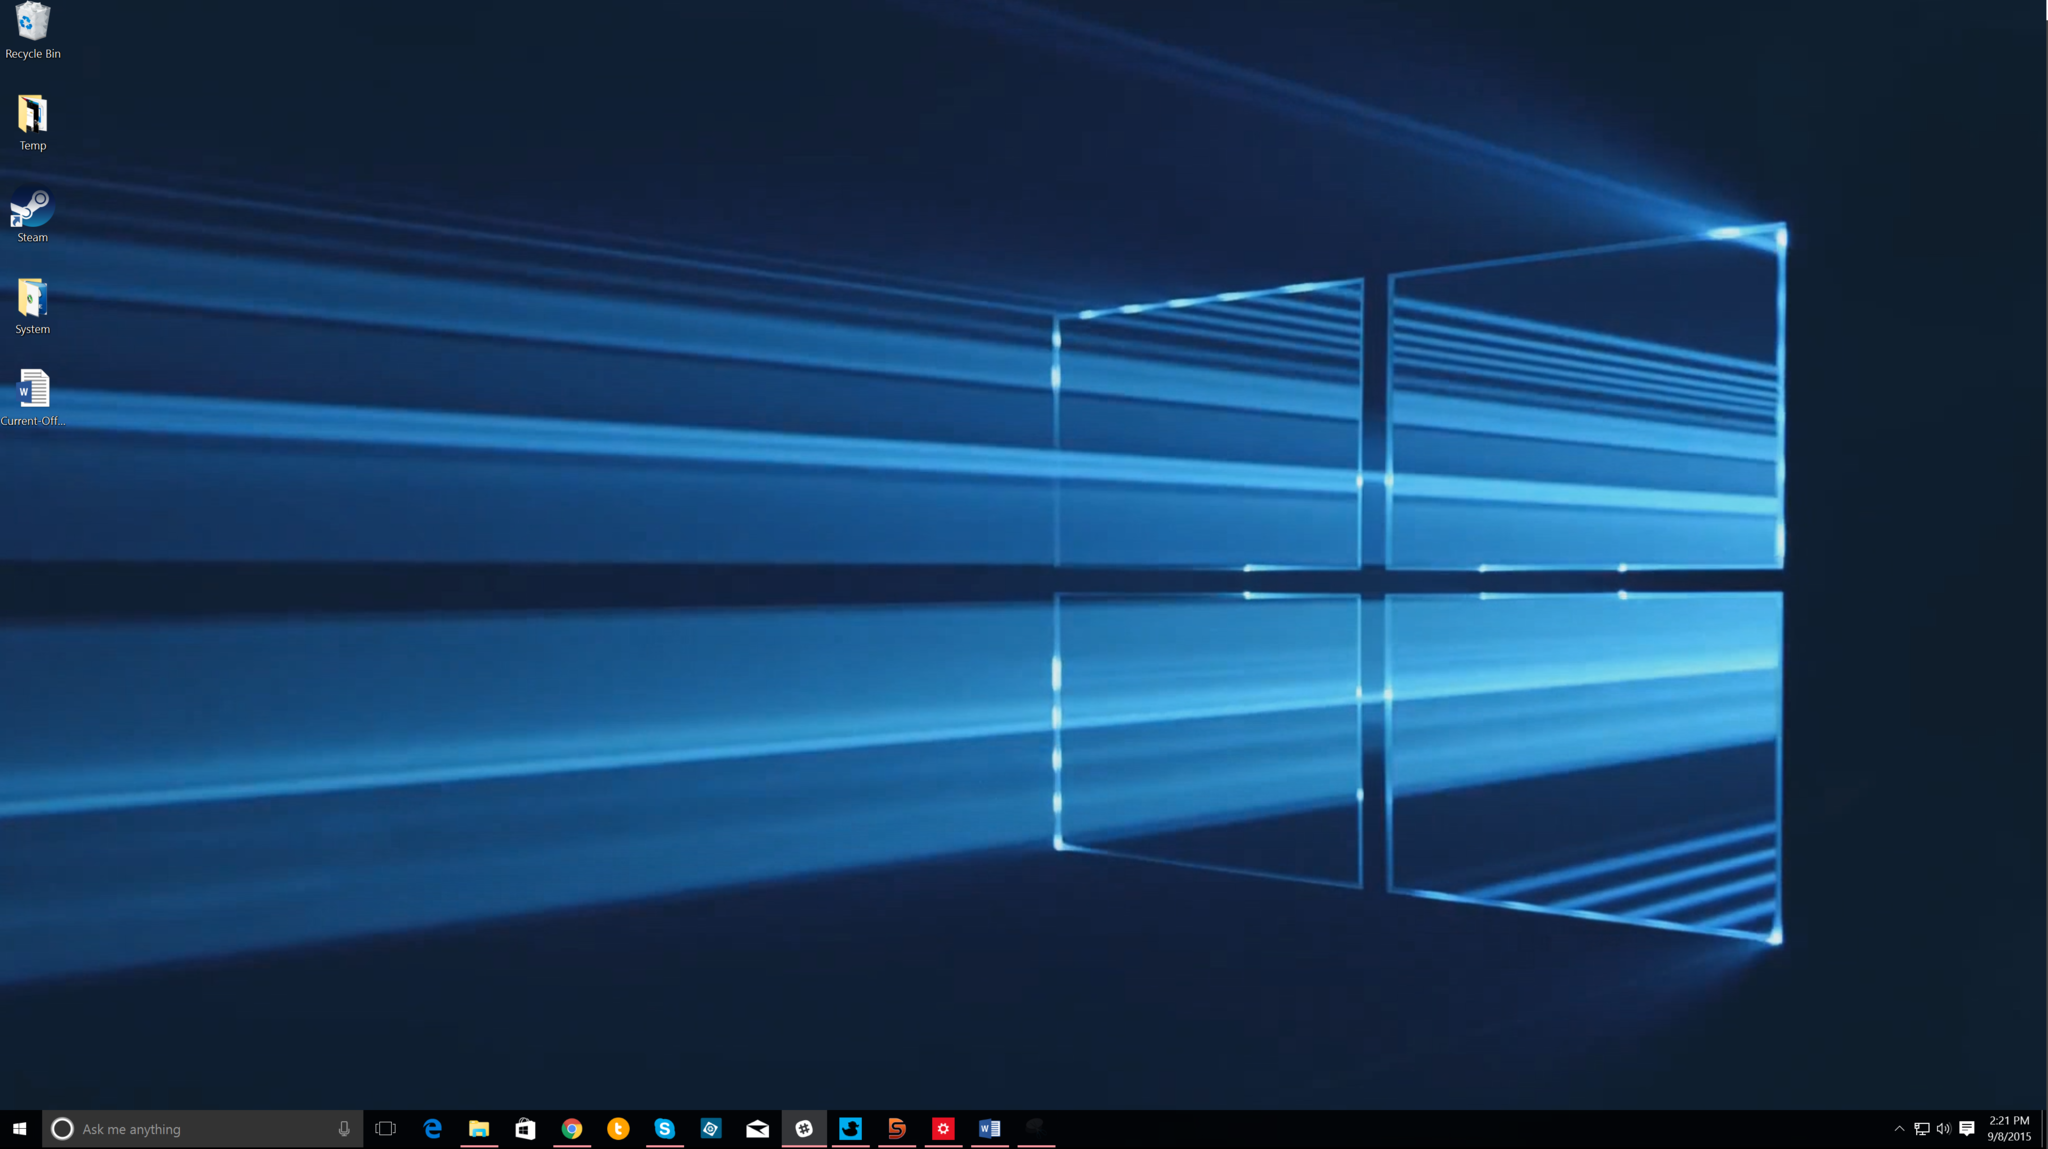 How To Get An Animated Desktop In Windows 10 With Deskscapes 8 Central - How To Get Animated Wallpapers Pc